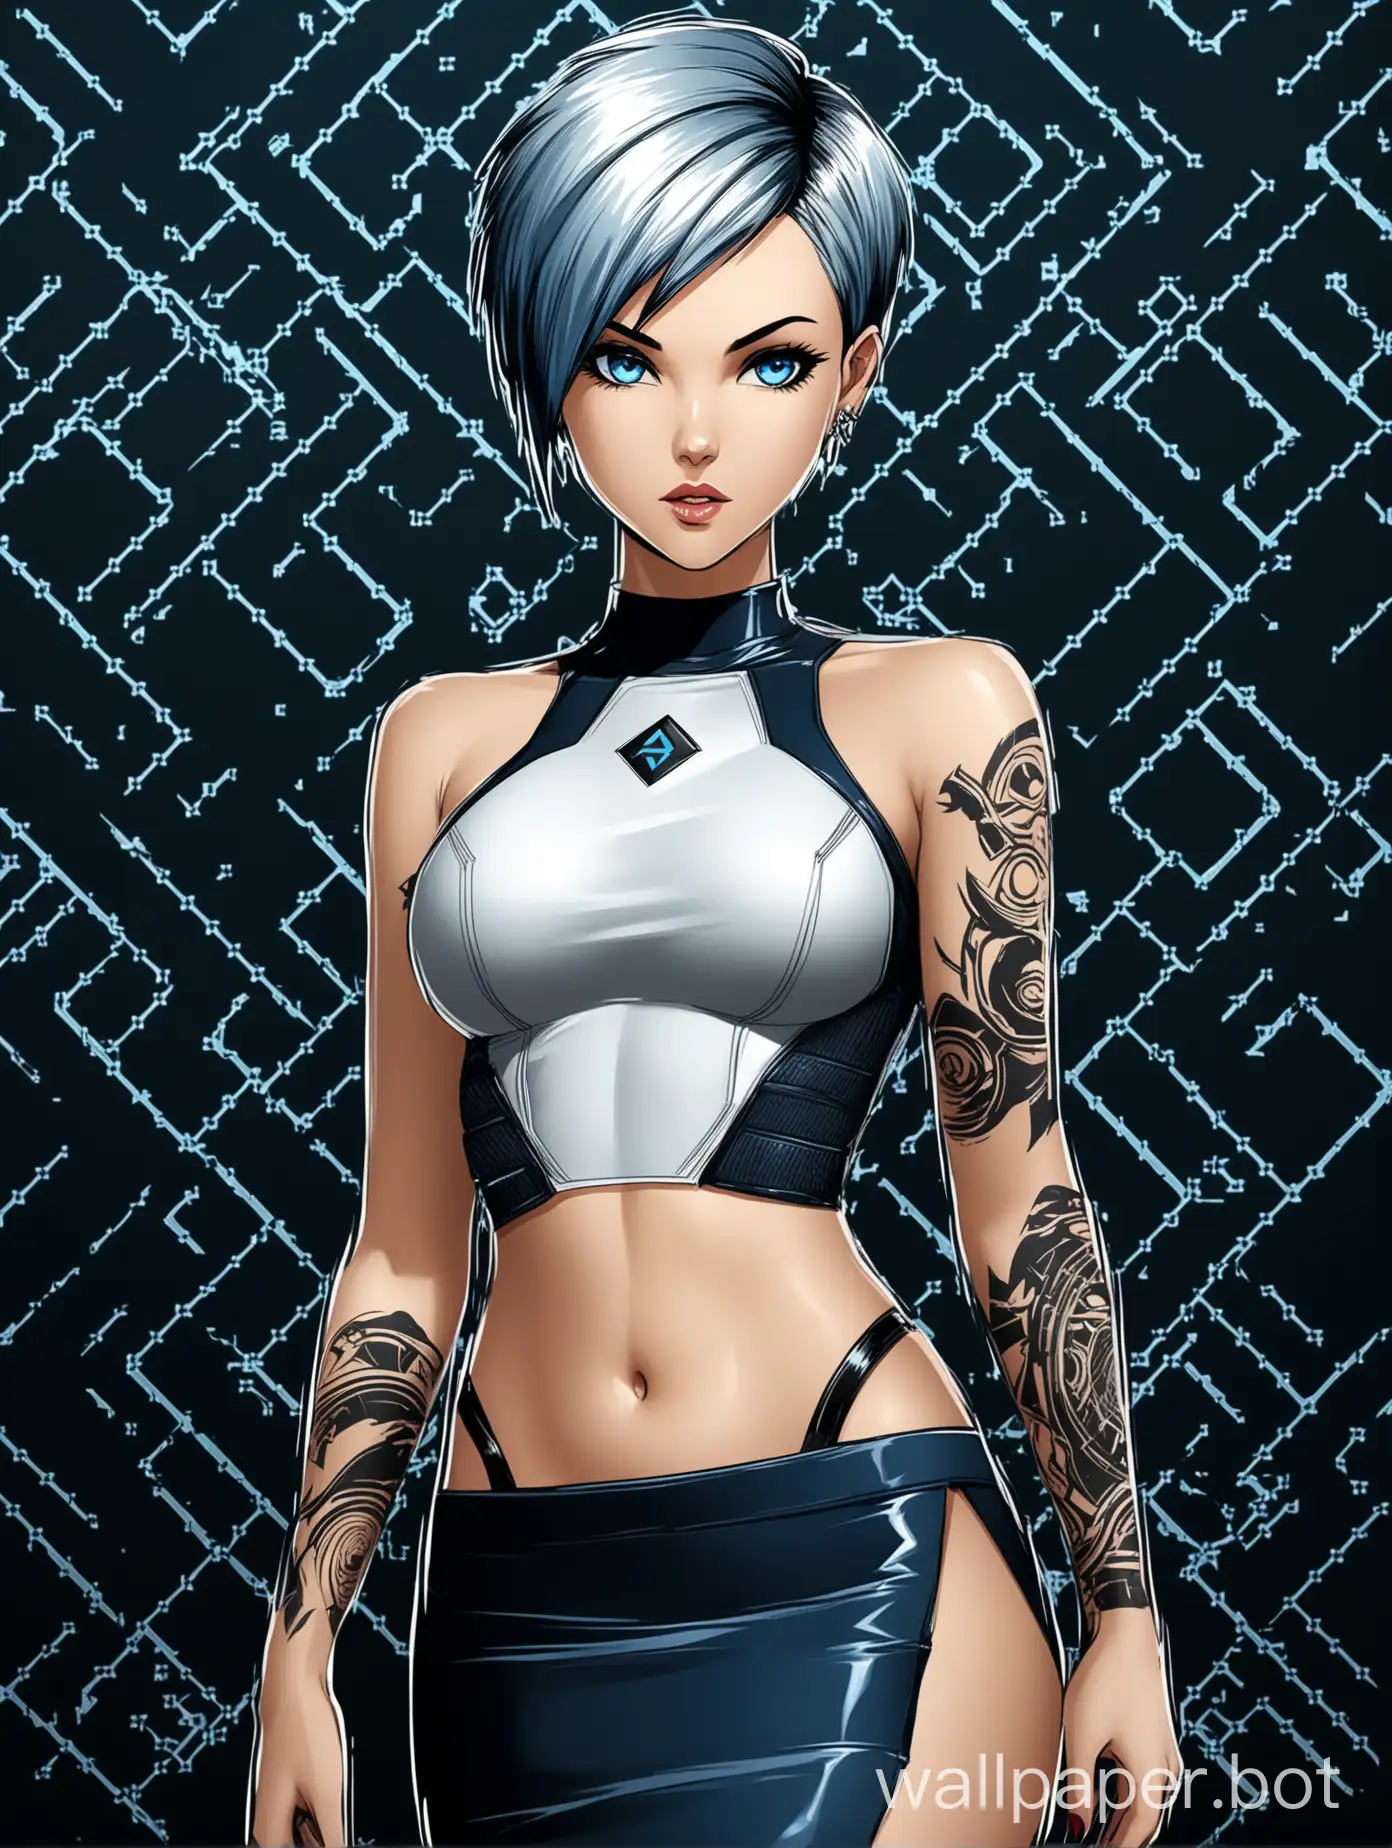 Sultry-Anime-Female-Character-with-Vibrant-Blue-Hairstyle-Seductive-and-Edgy-Wallpaper-Inspired-by-XXX-Return-of-Xander-Cage